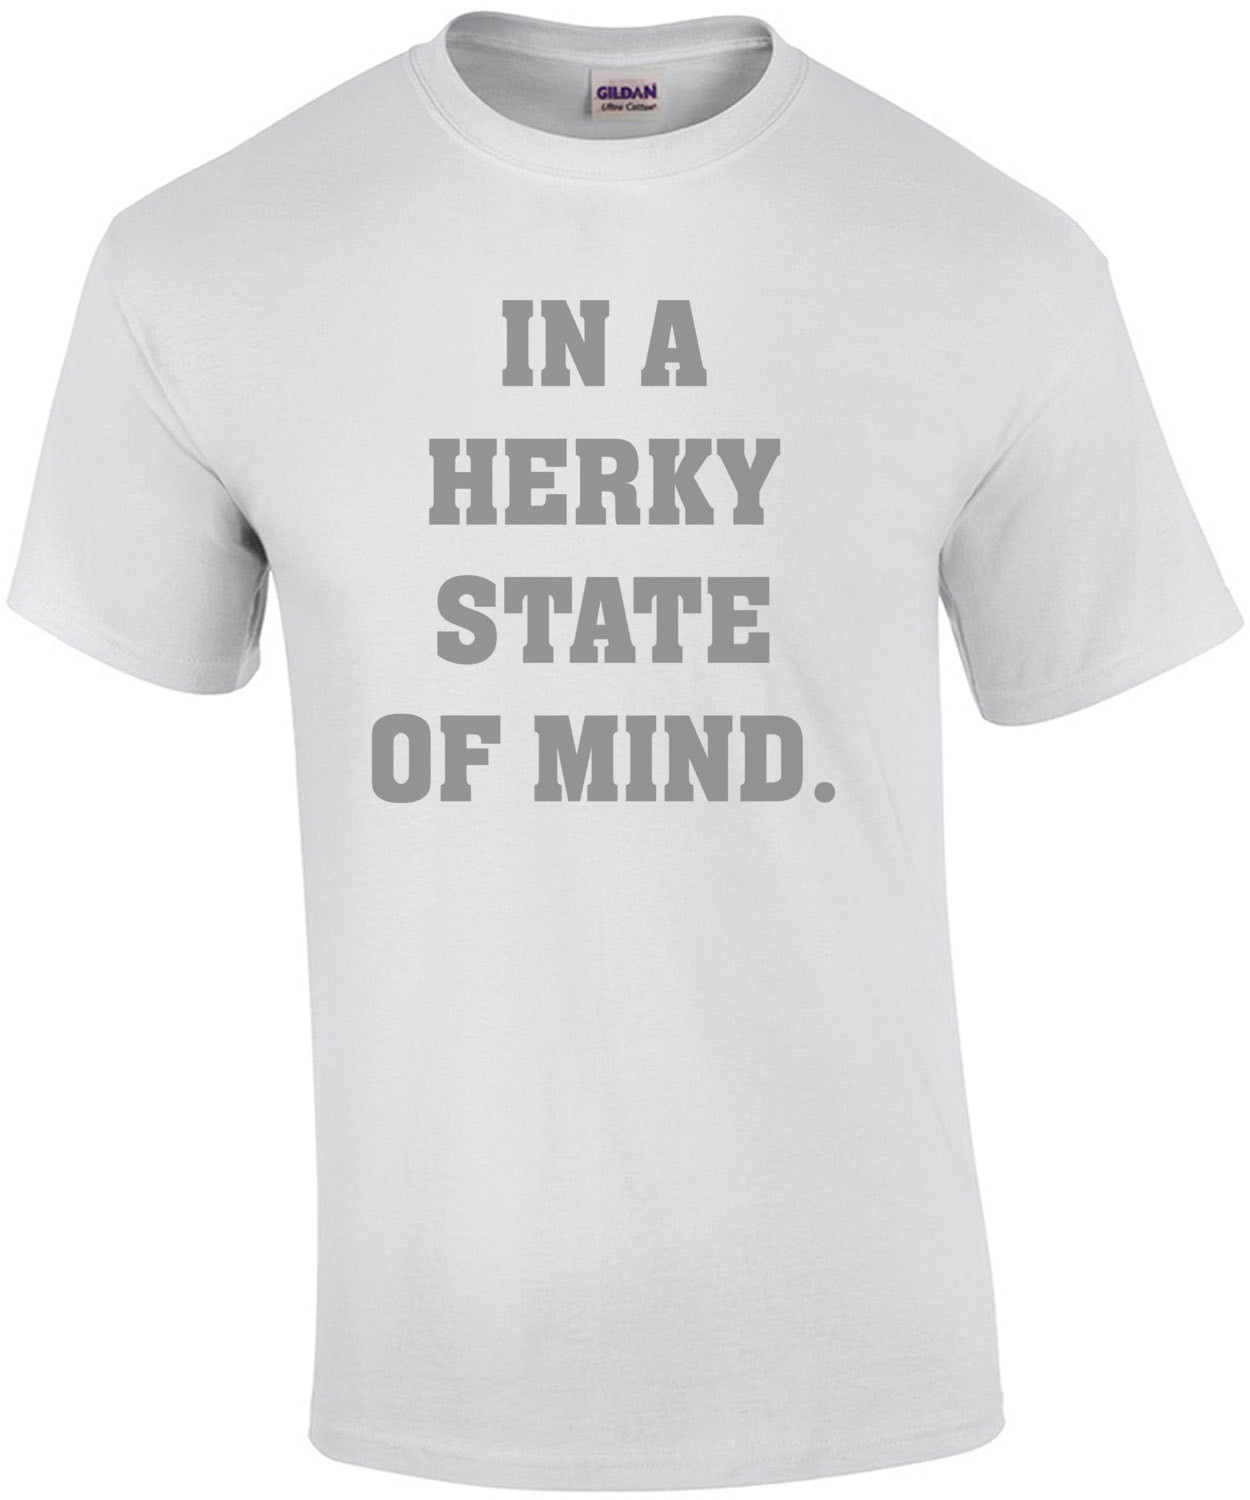 In a herky state of mind - iowa t-shirt